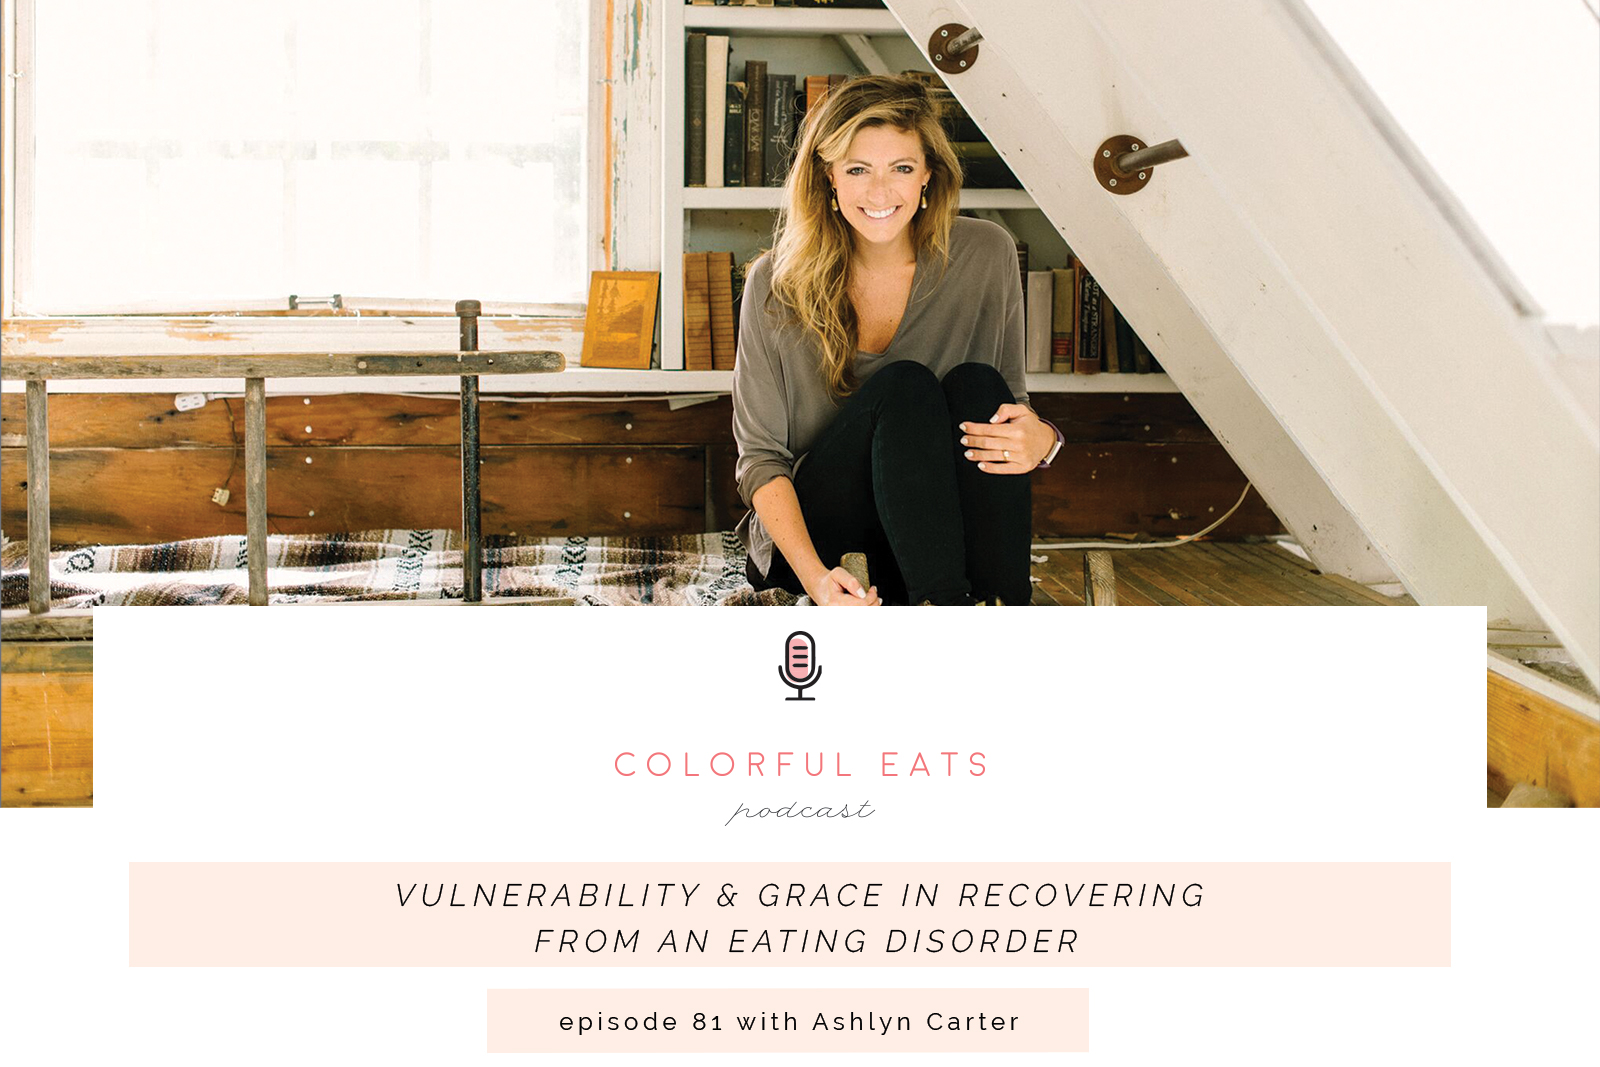 Episode 81: Vulnerability & Grace in Recovering from an Eating Disorder with Ashlyn Carter